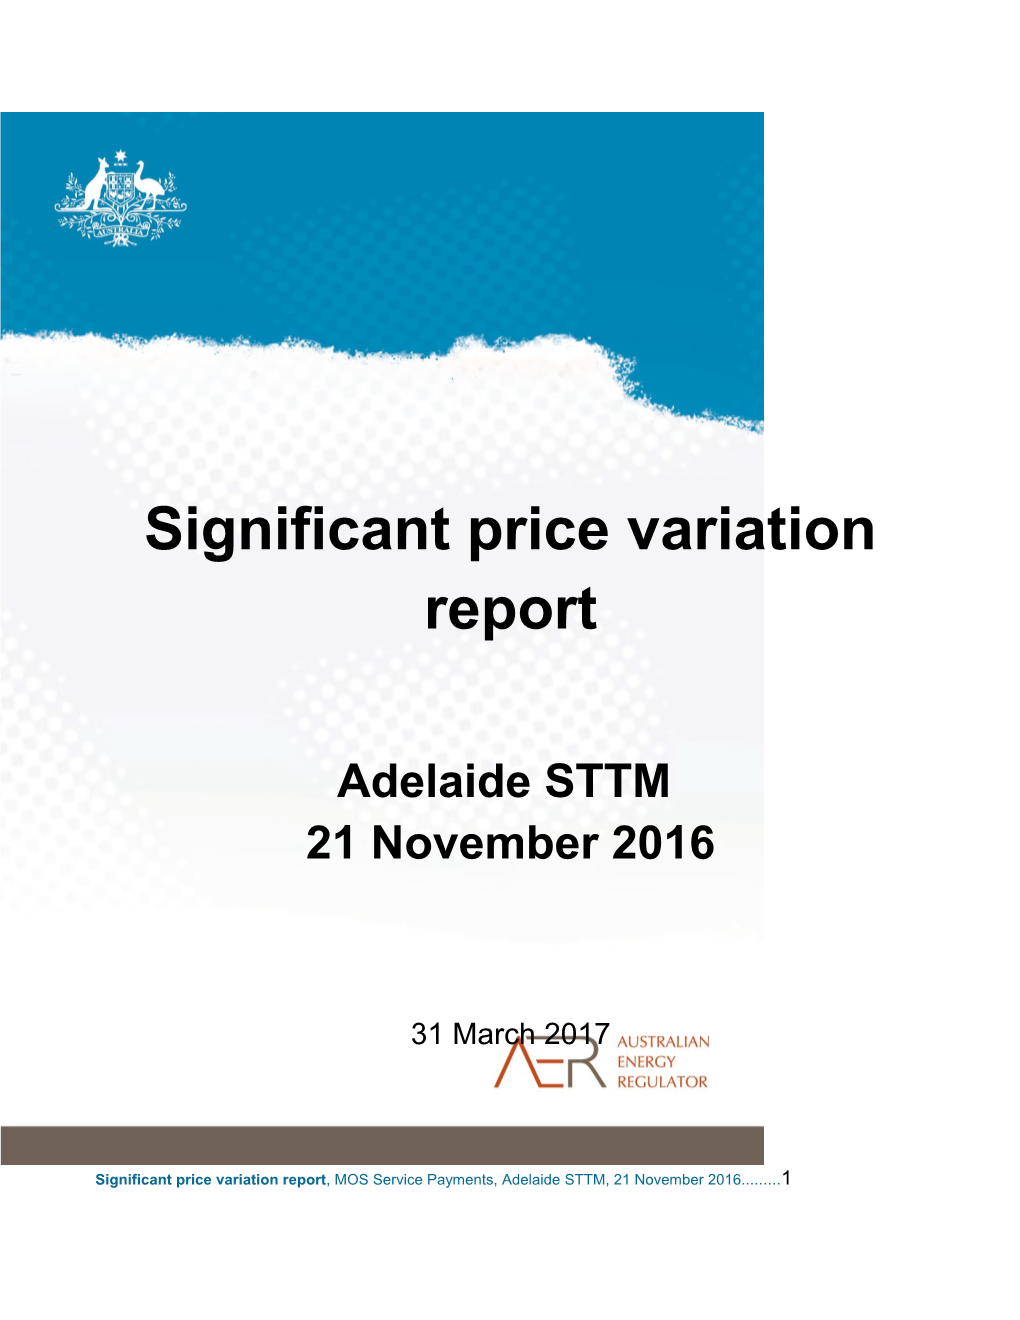 Significant Price Variation Report